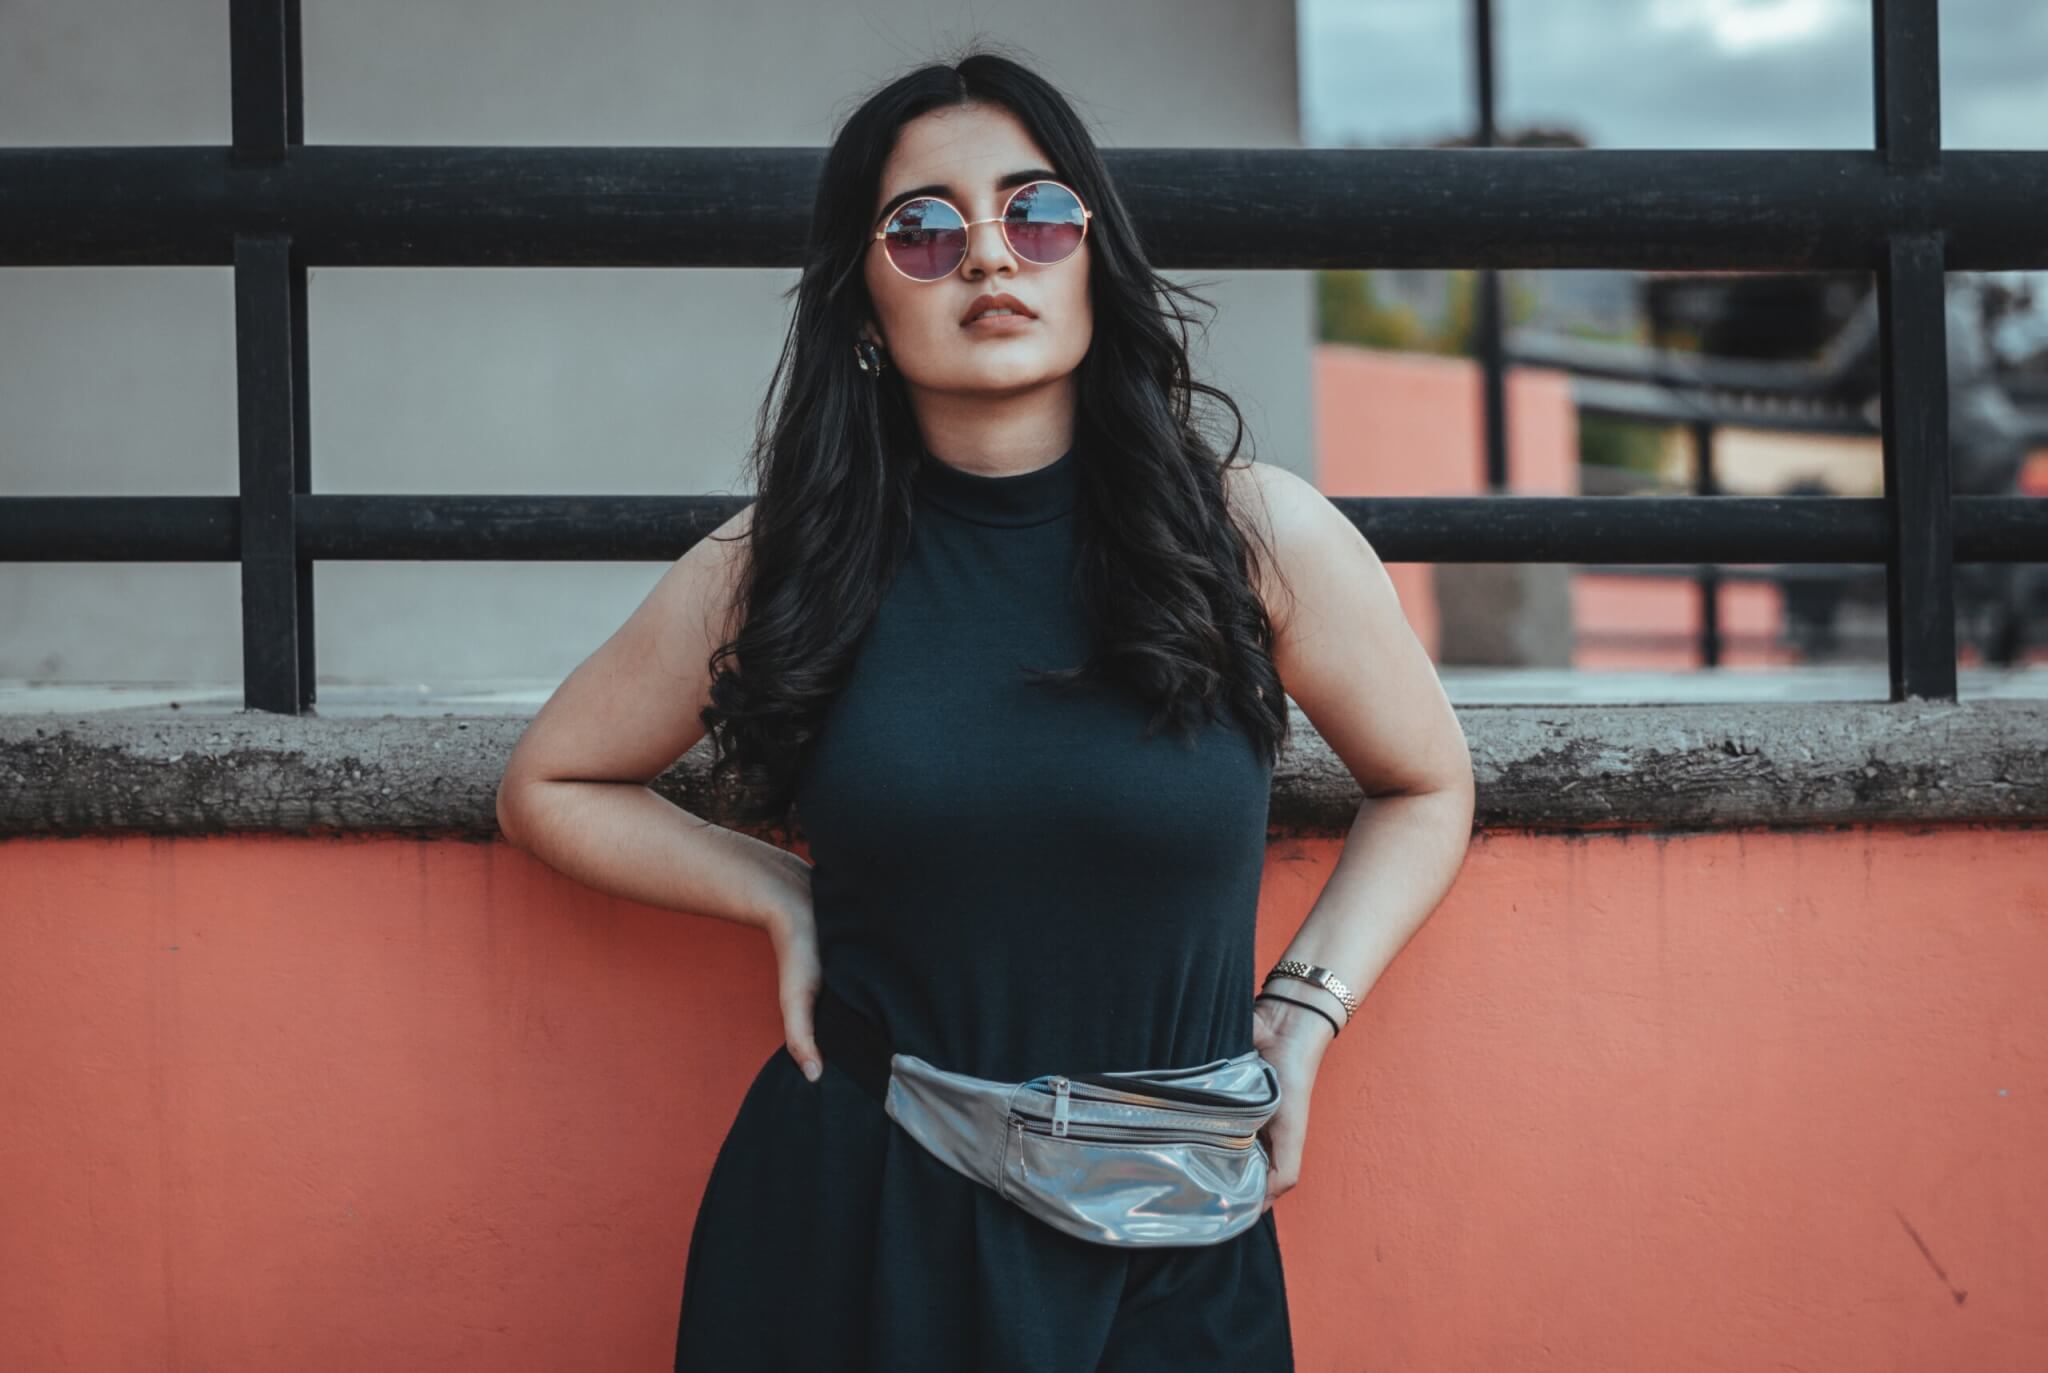 These Fanny Packs Are Sure To Make You Look Hipster Chic With